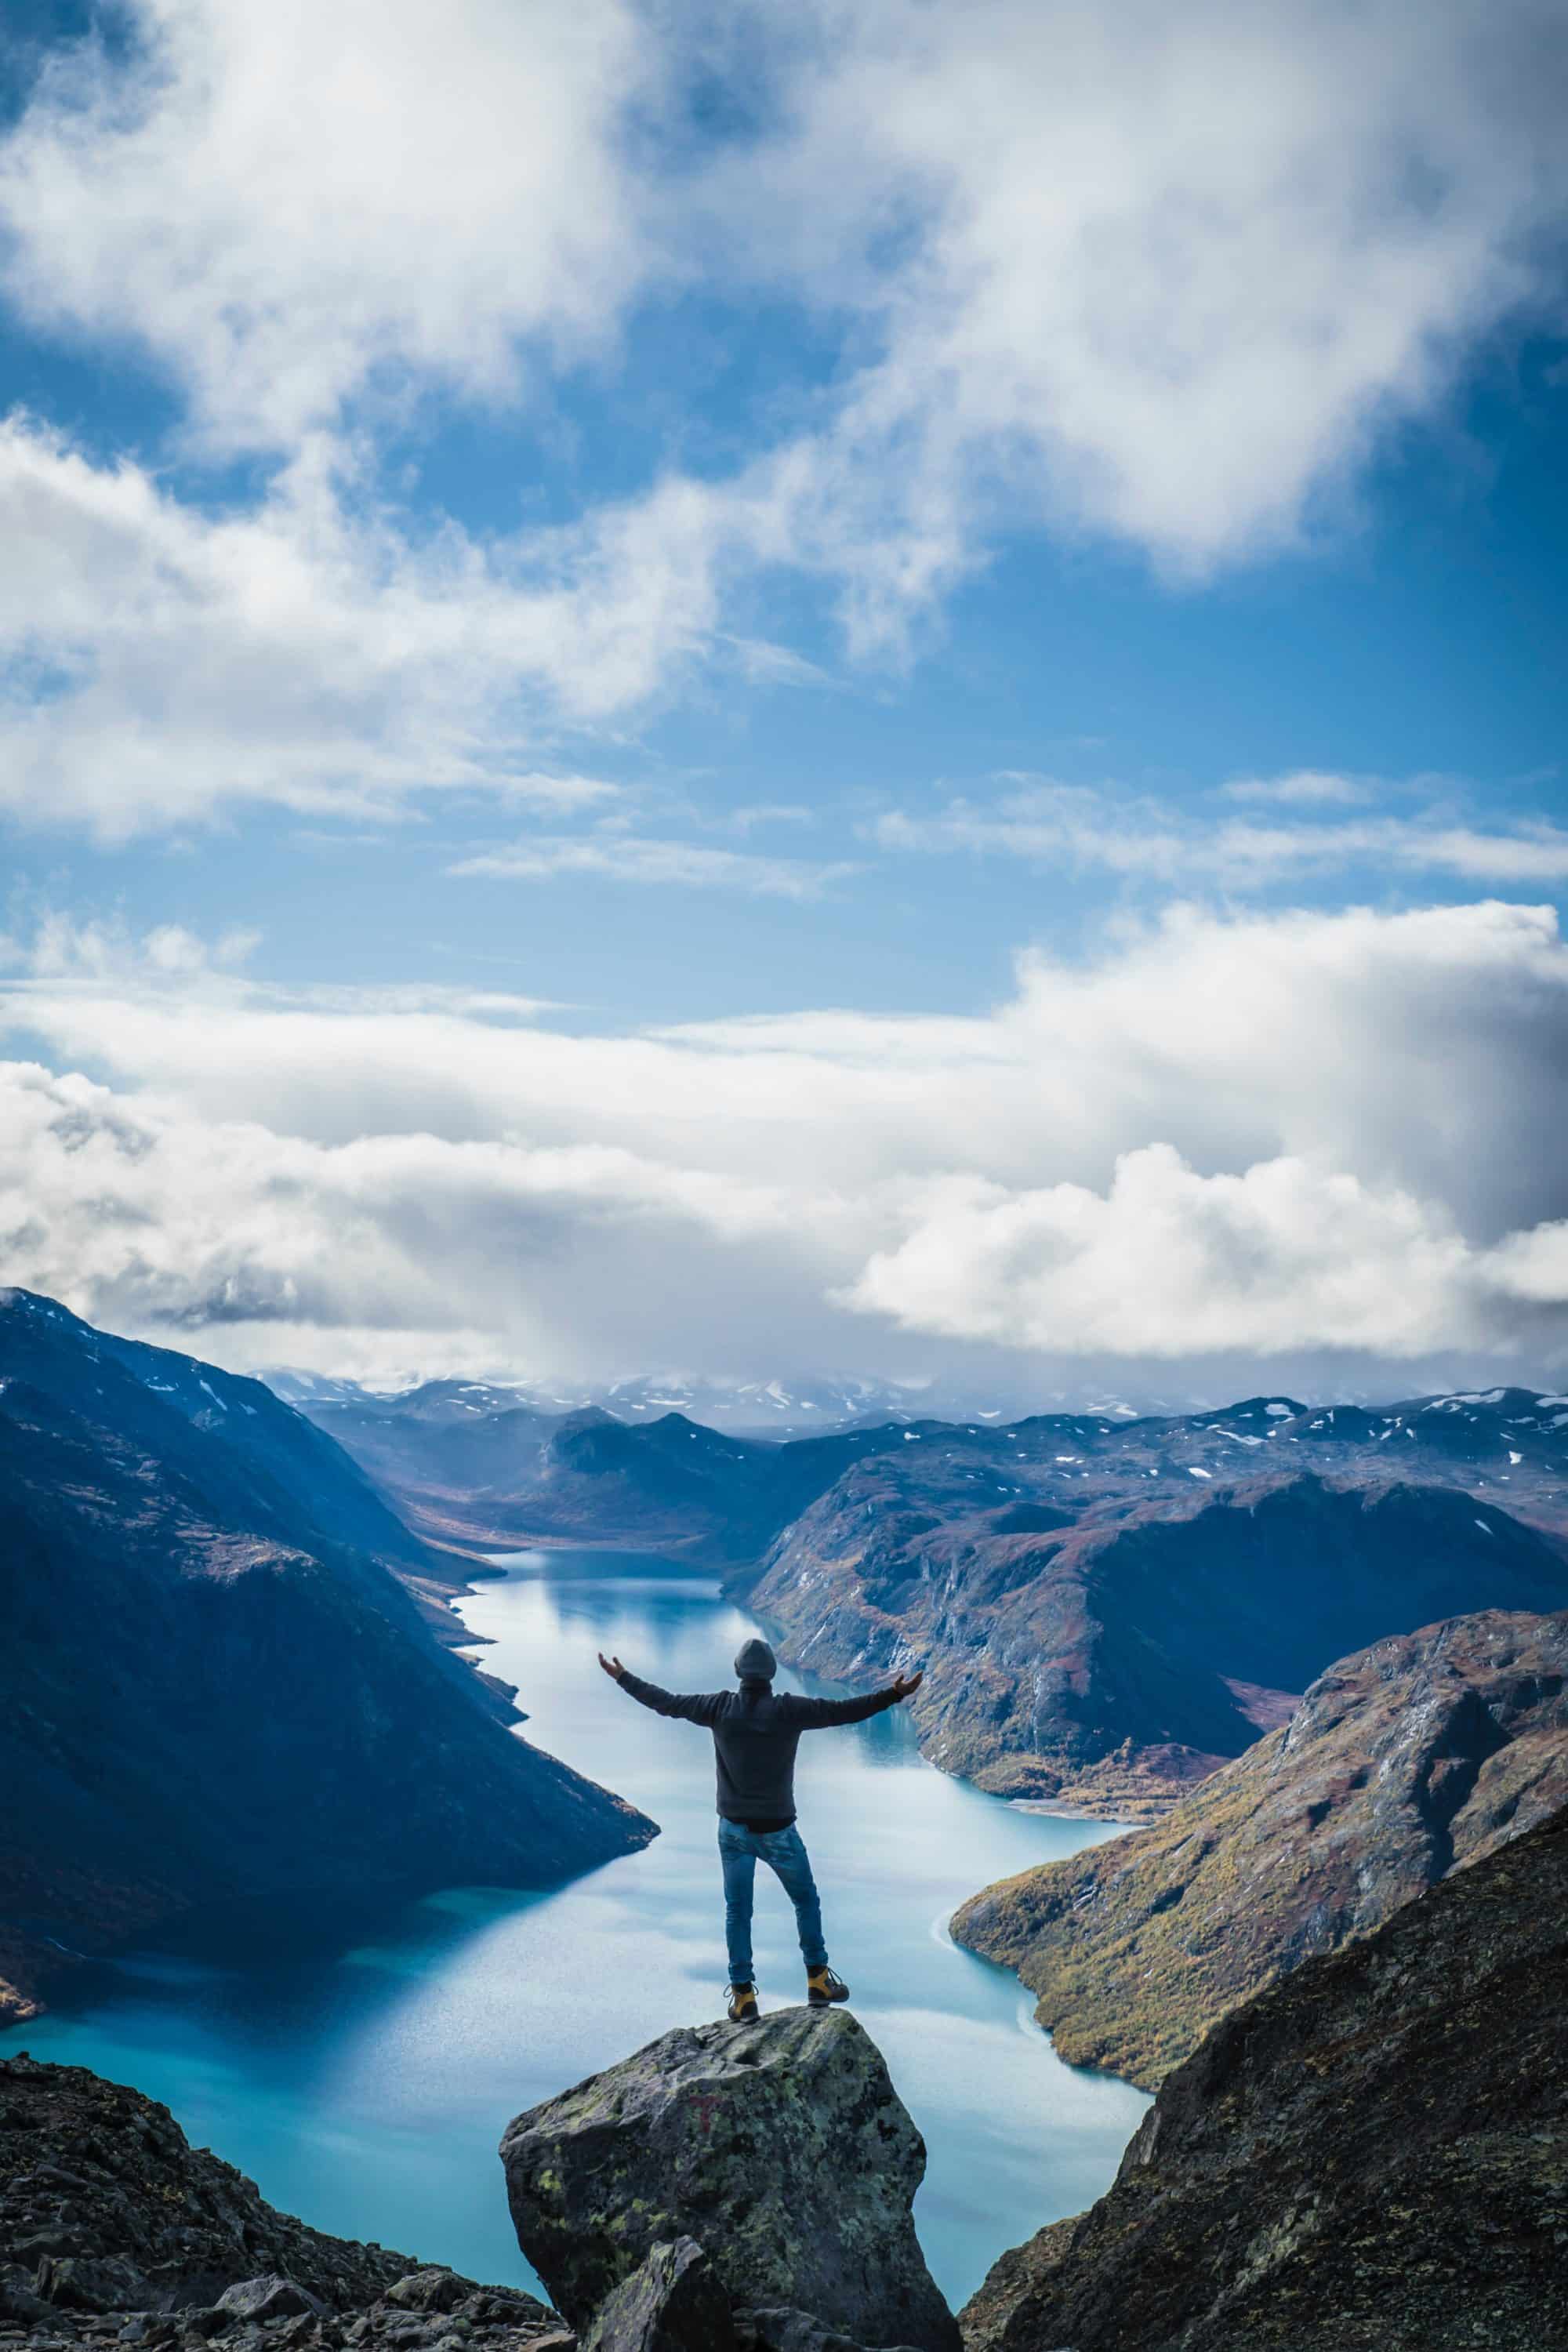 A man standing on a mountain overlooking water.